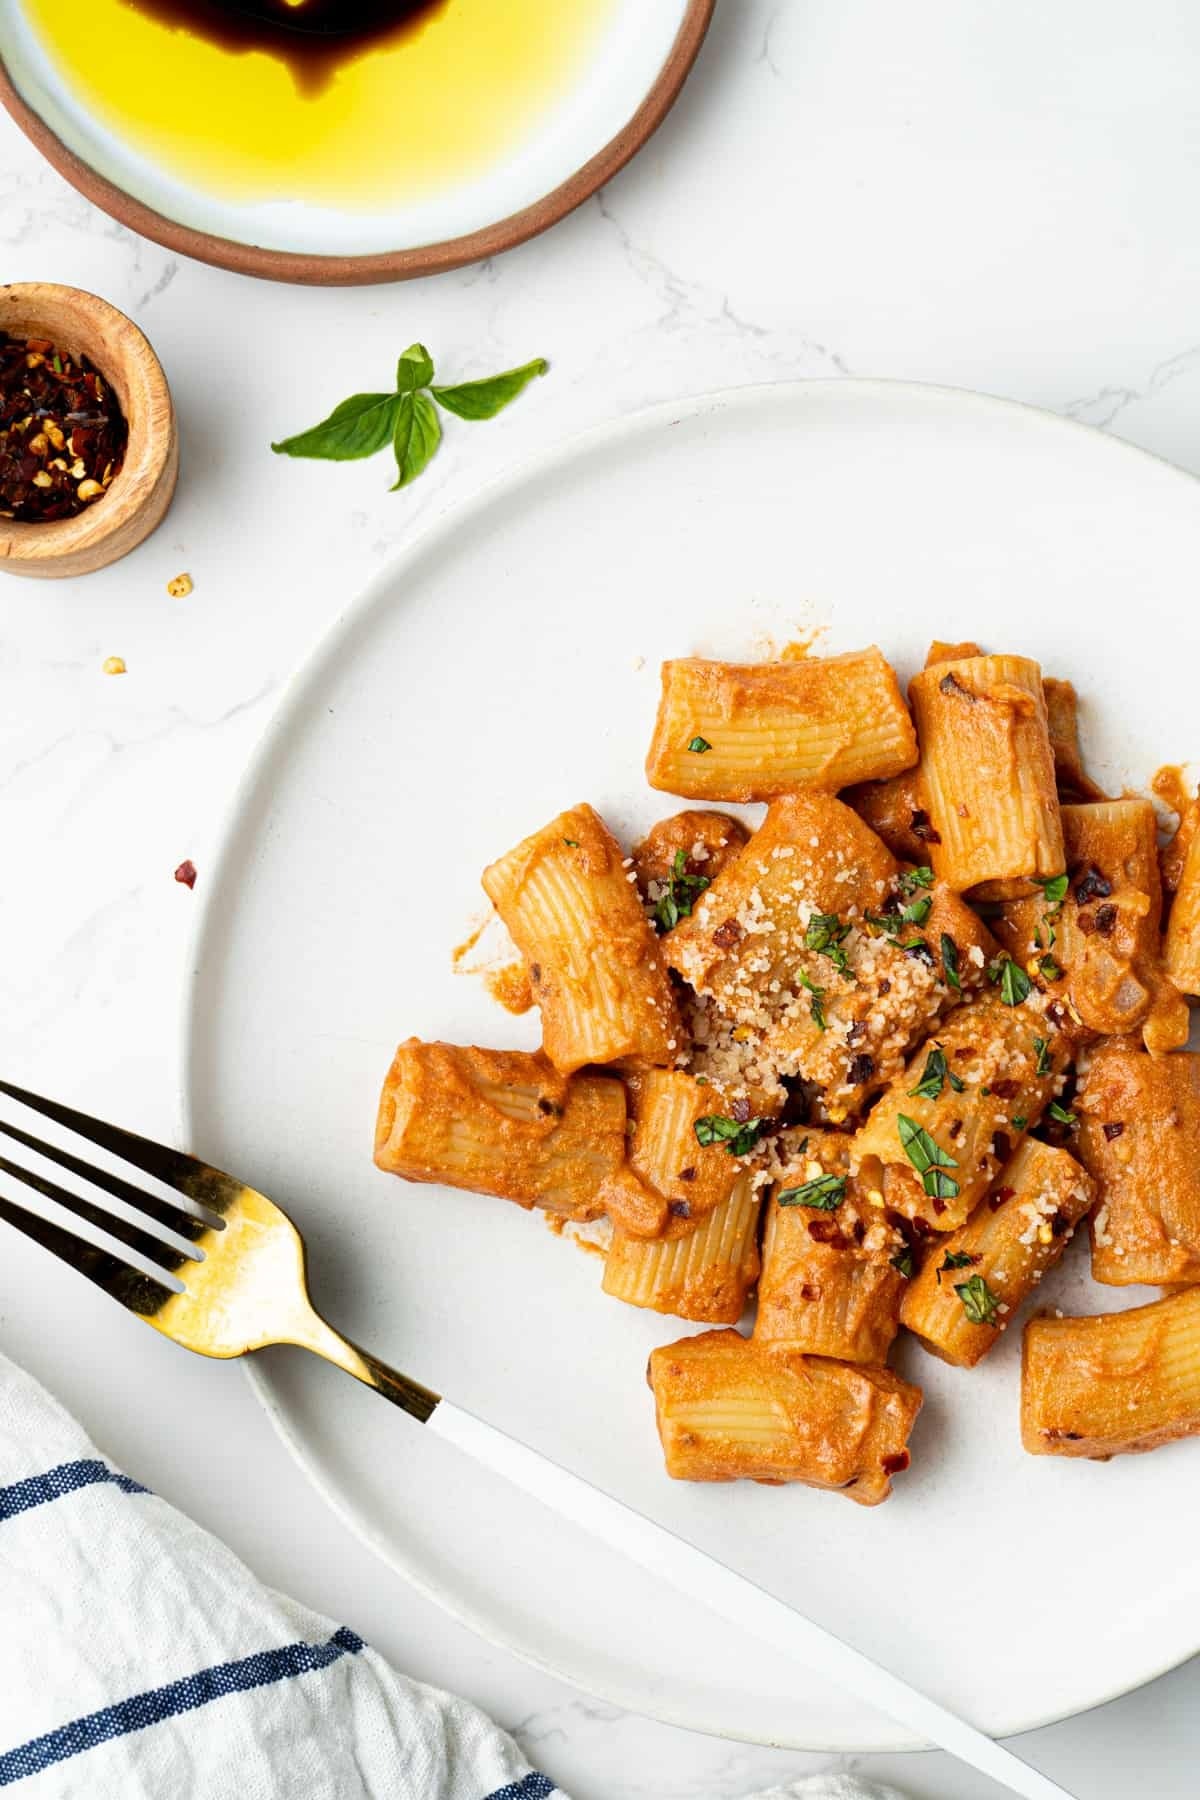 Spicy rigatoni pasta with tomato sauce on a plate 